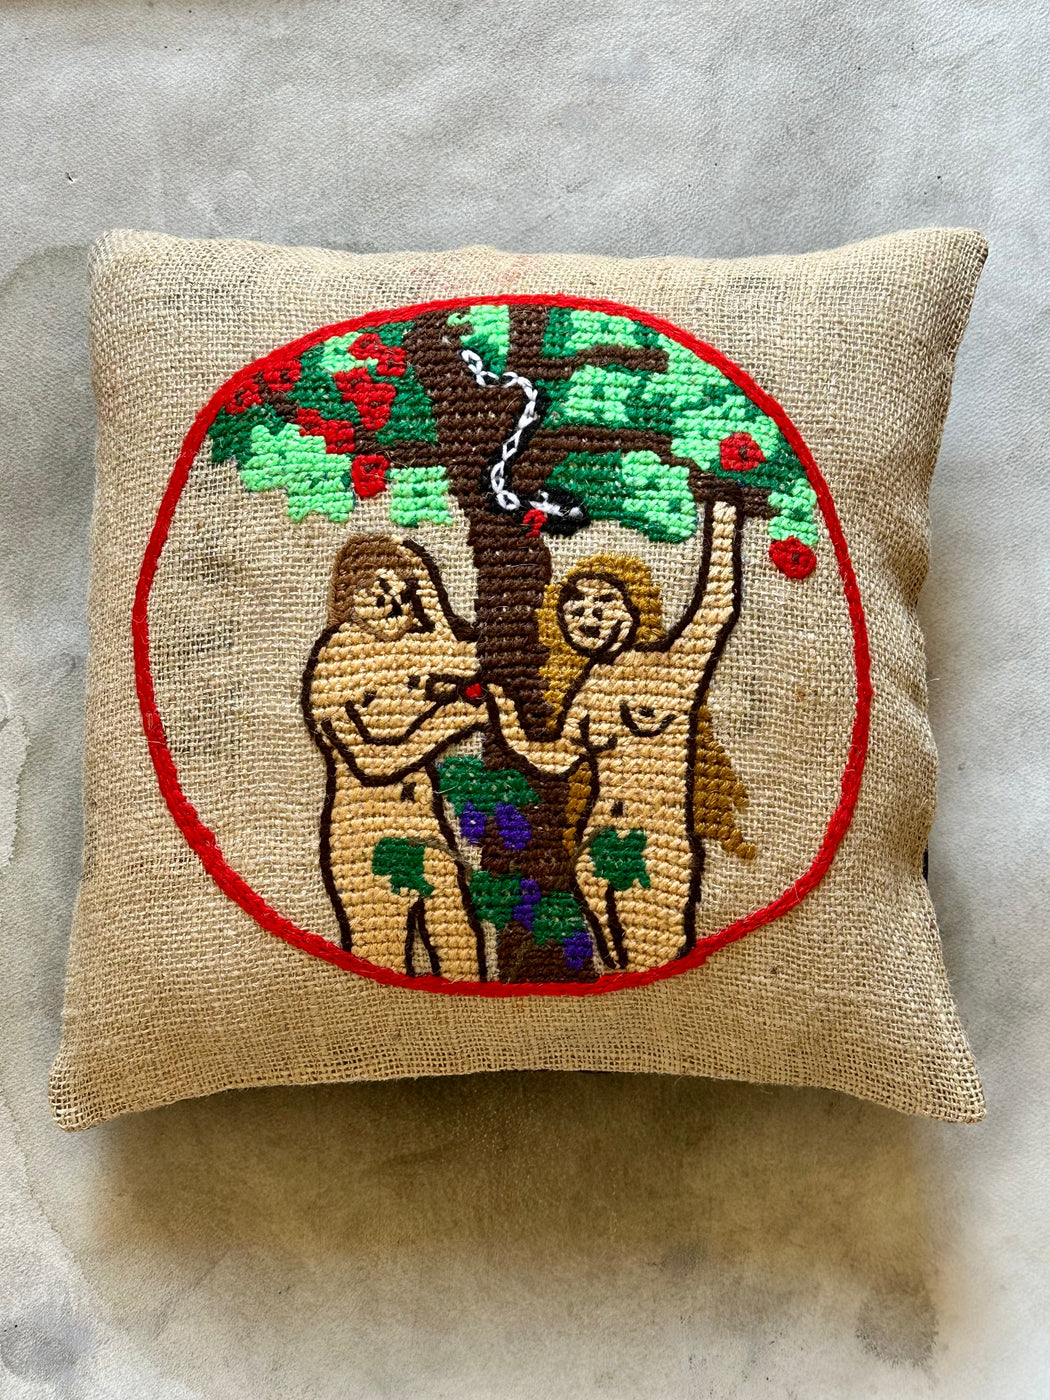 "Adam and Eve" Hand-Embroidered Throw Pillow